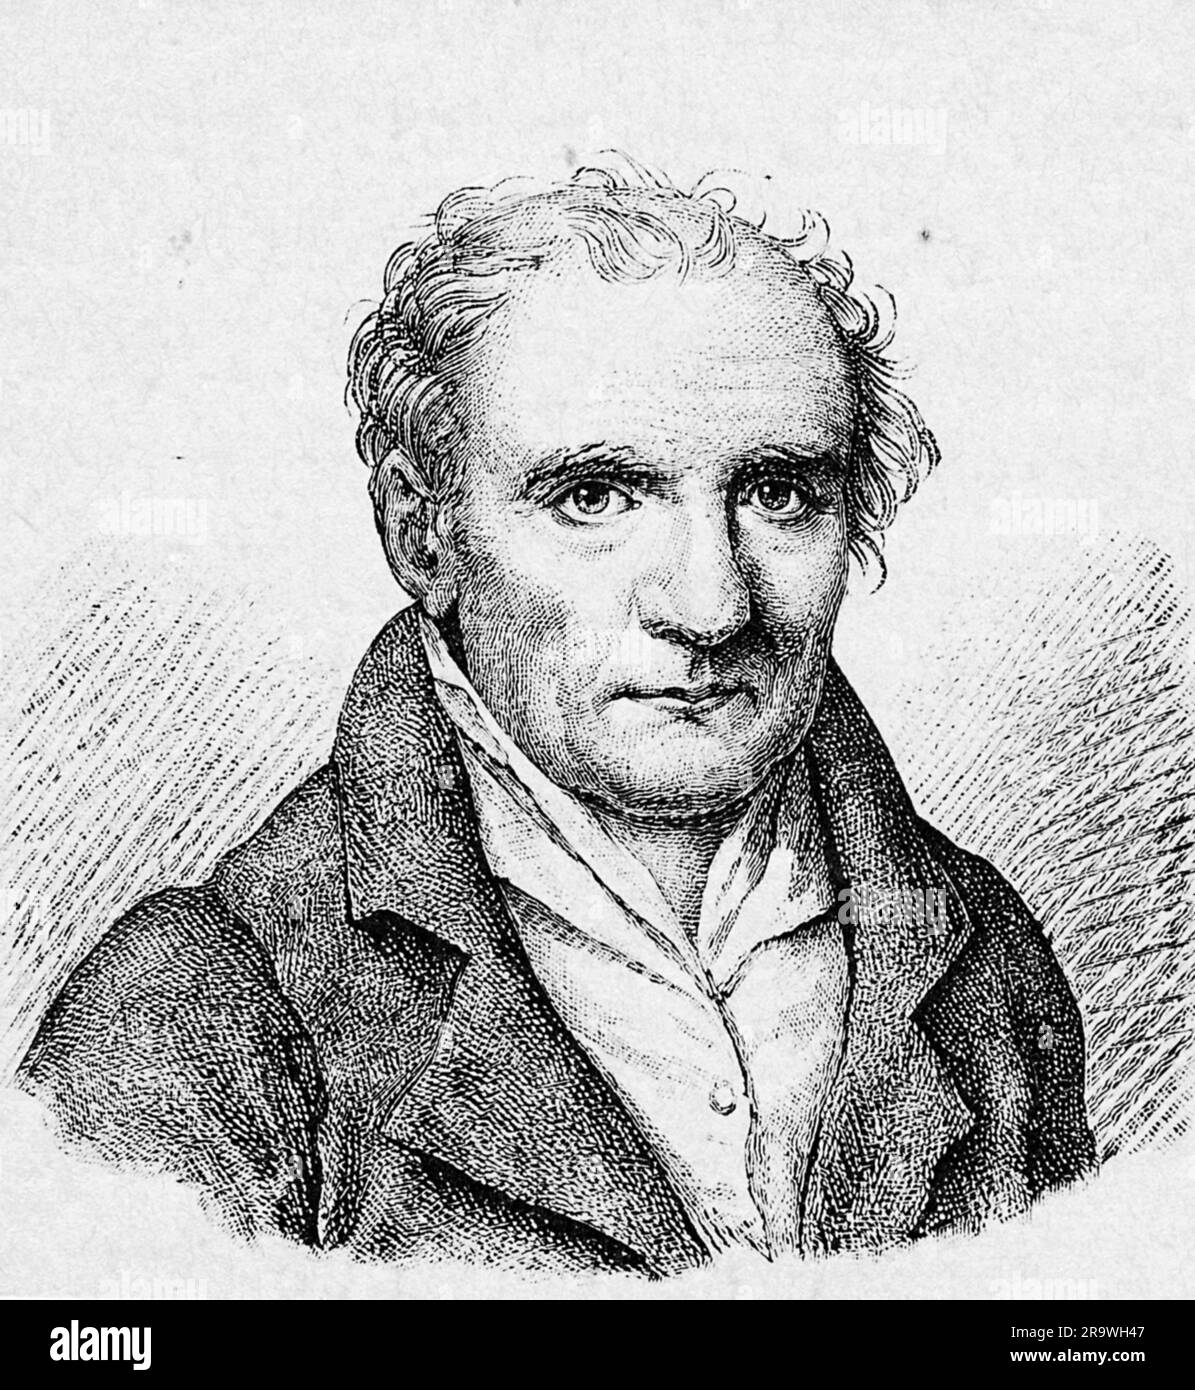 Monge, Gaspard, 10.5.1746 - 28.7.1818, French mathematician, portrait, wood engraving, 19th century, ADDITIONAL-RIGHTS-CLEARANCE-INFO-NOT-AVAILABLE Stock Photo